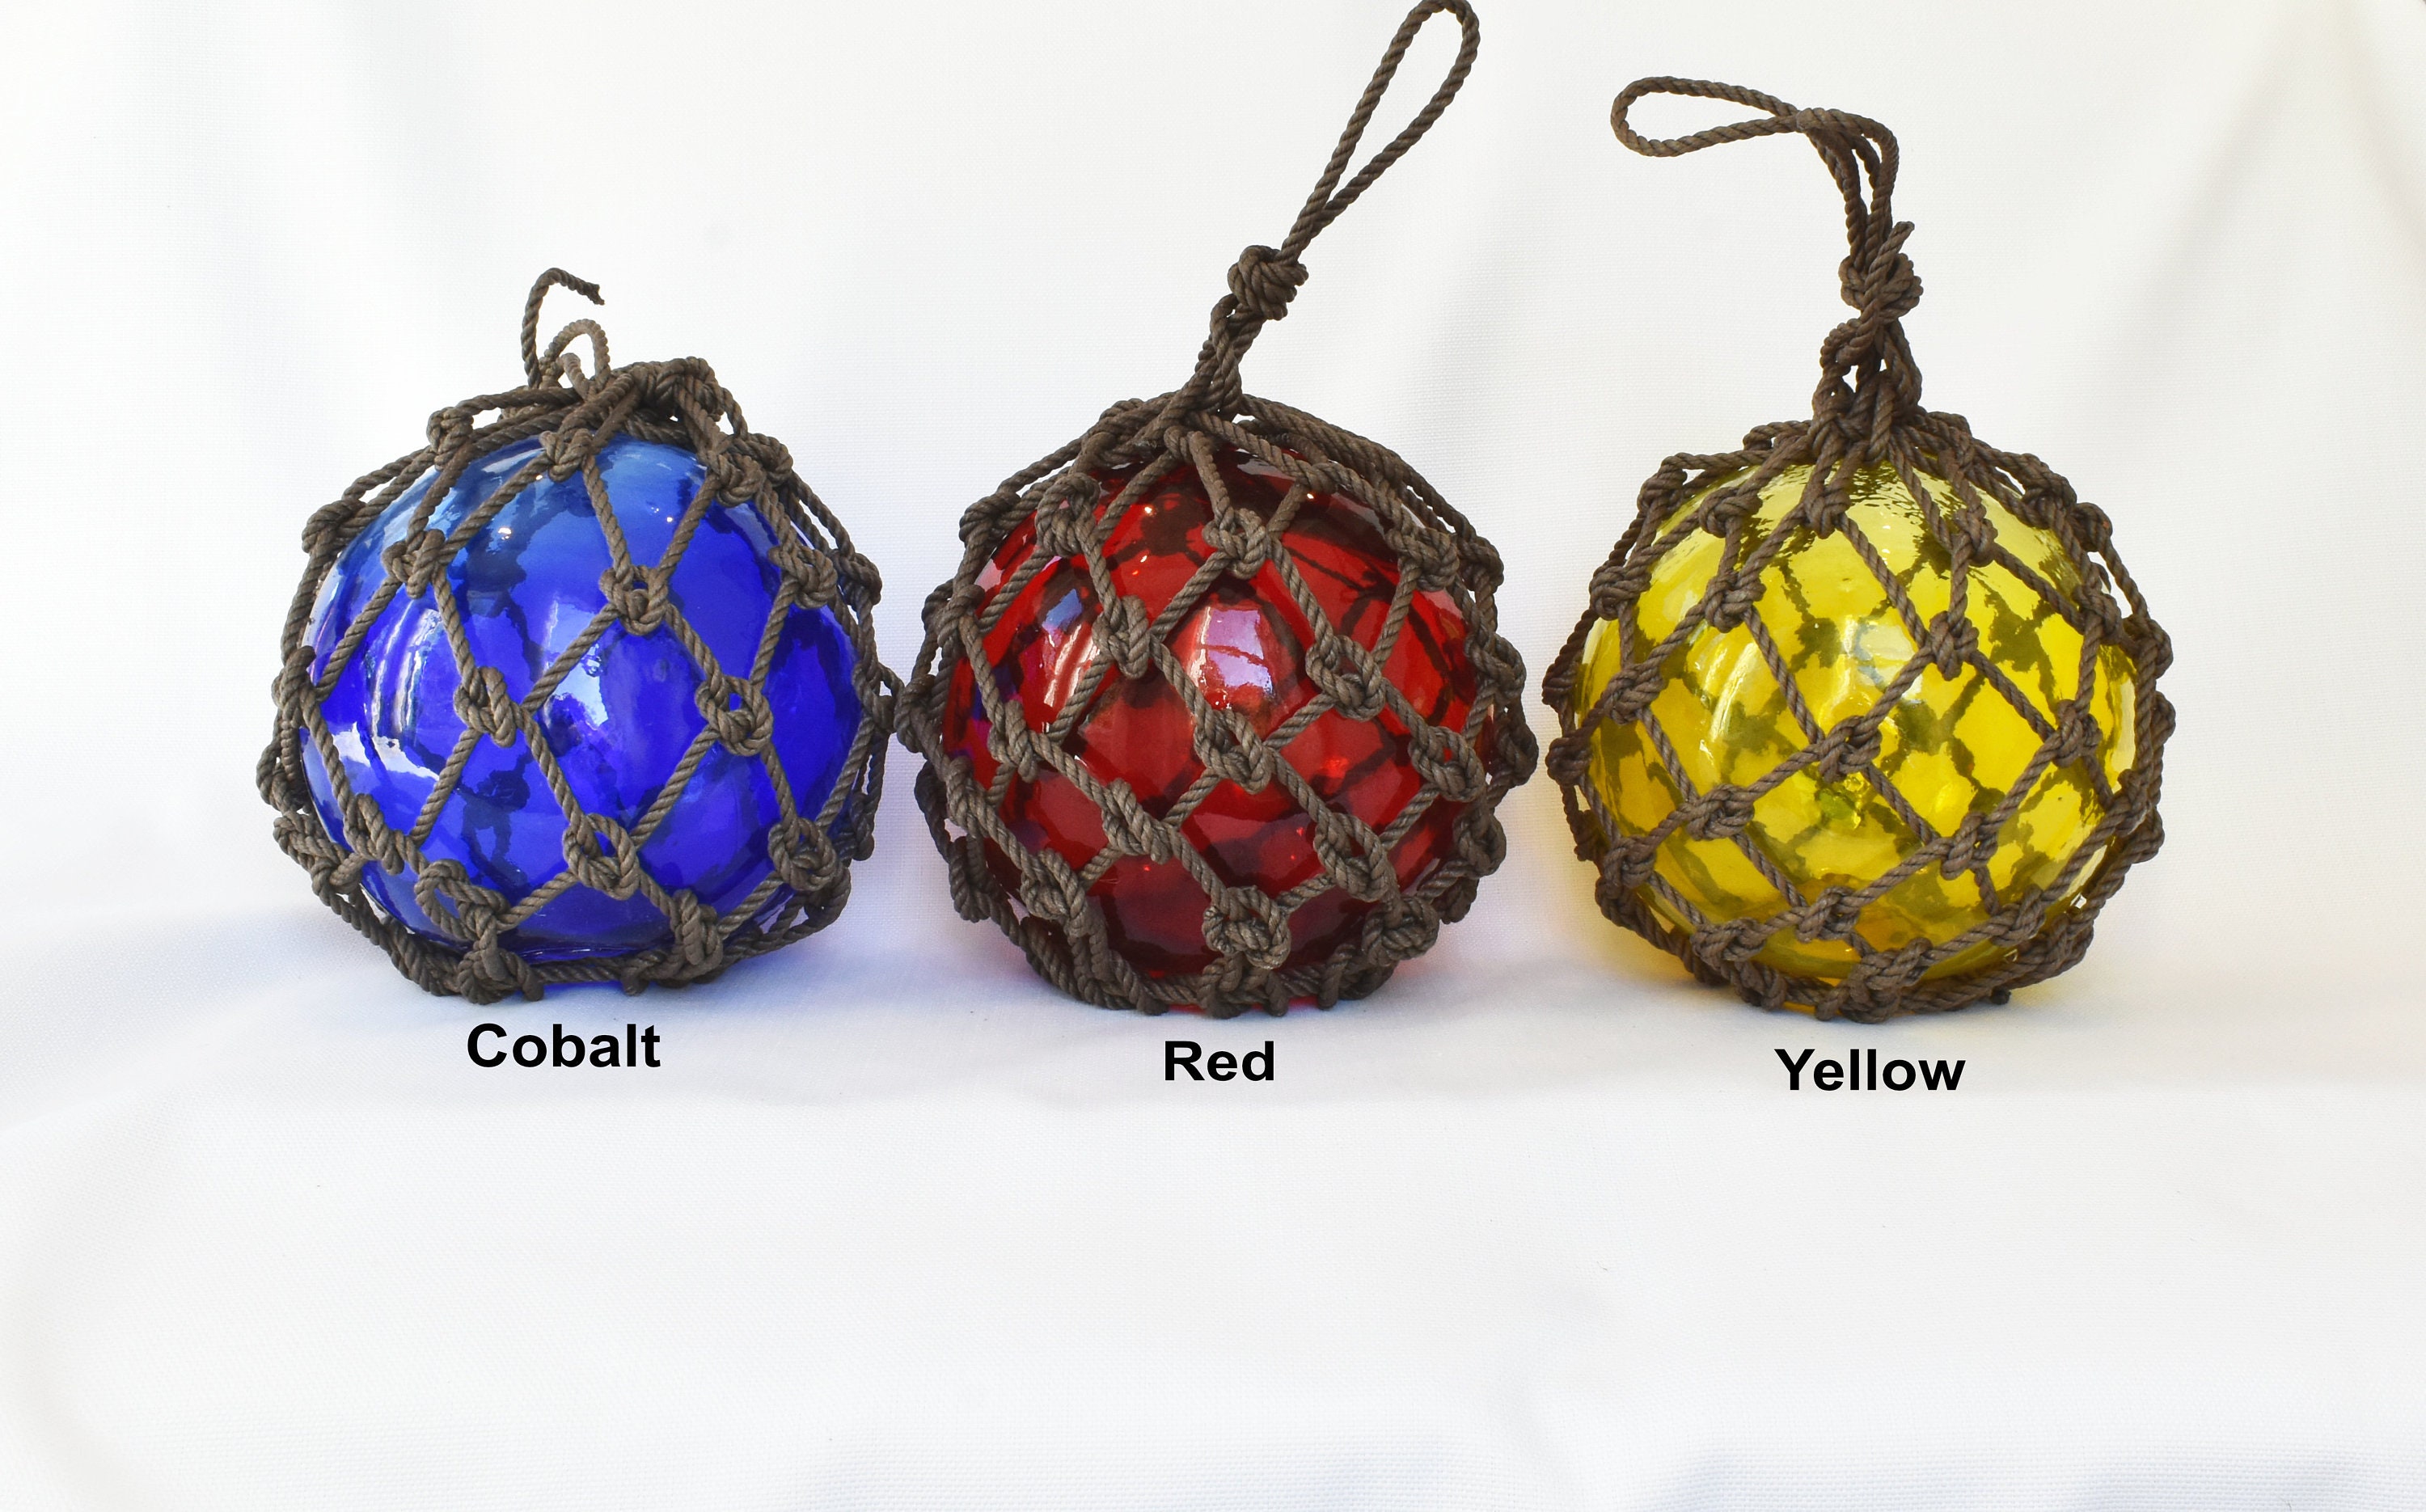 Fishing Float Light Fixture With 3 Glass Floats 